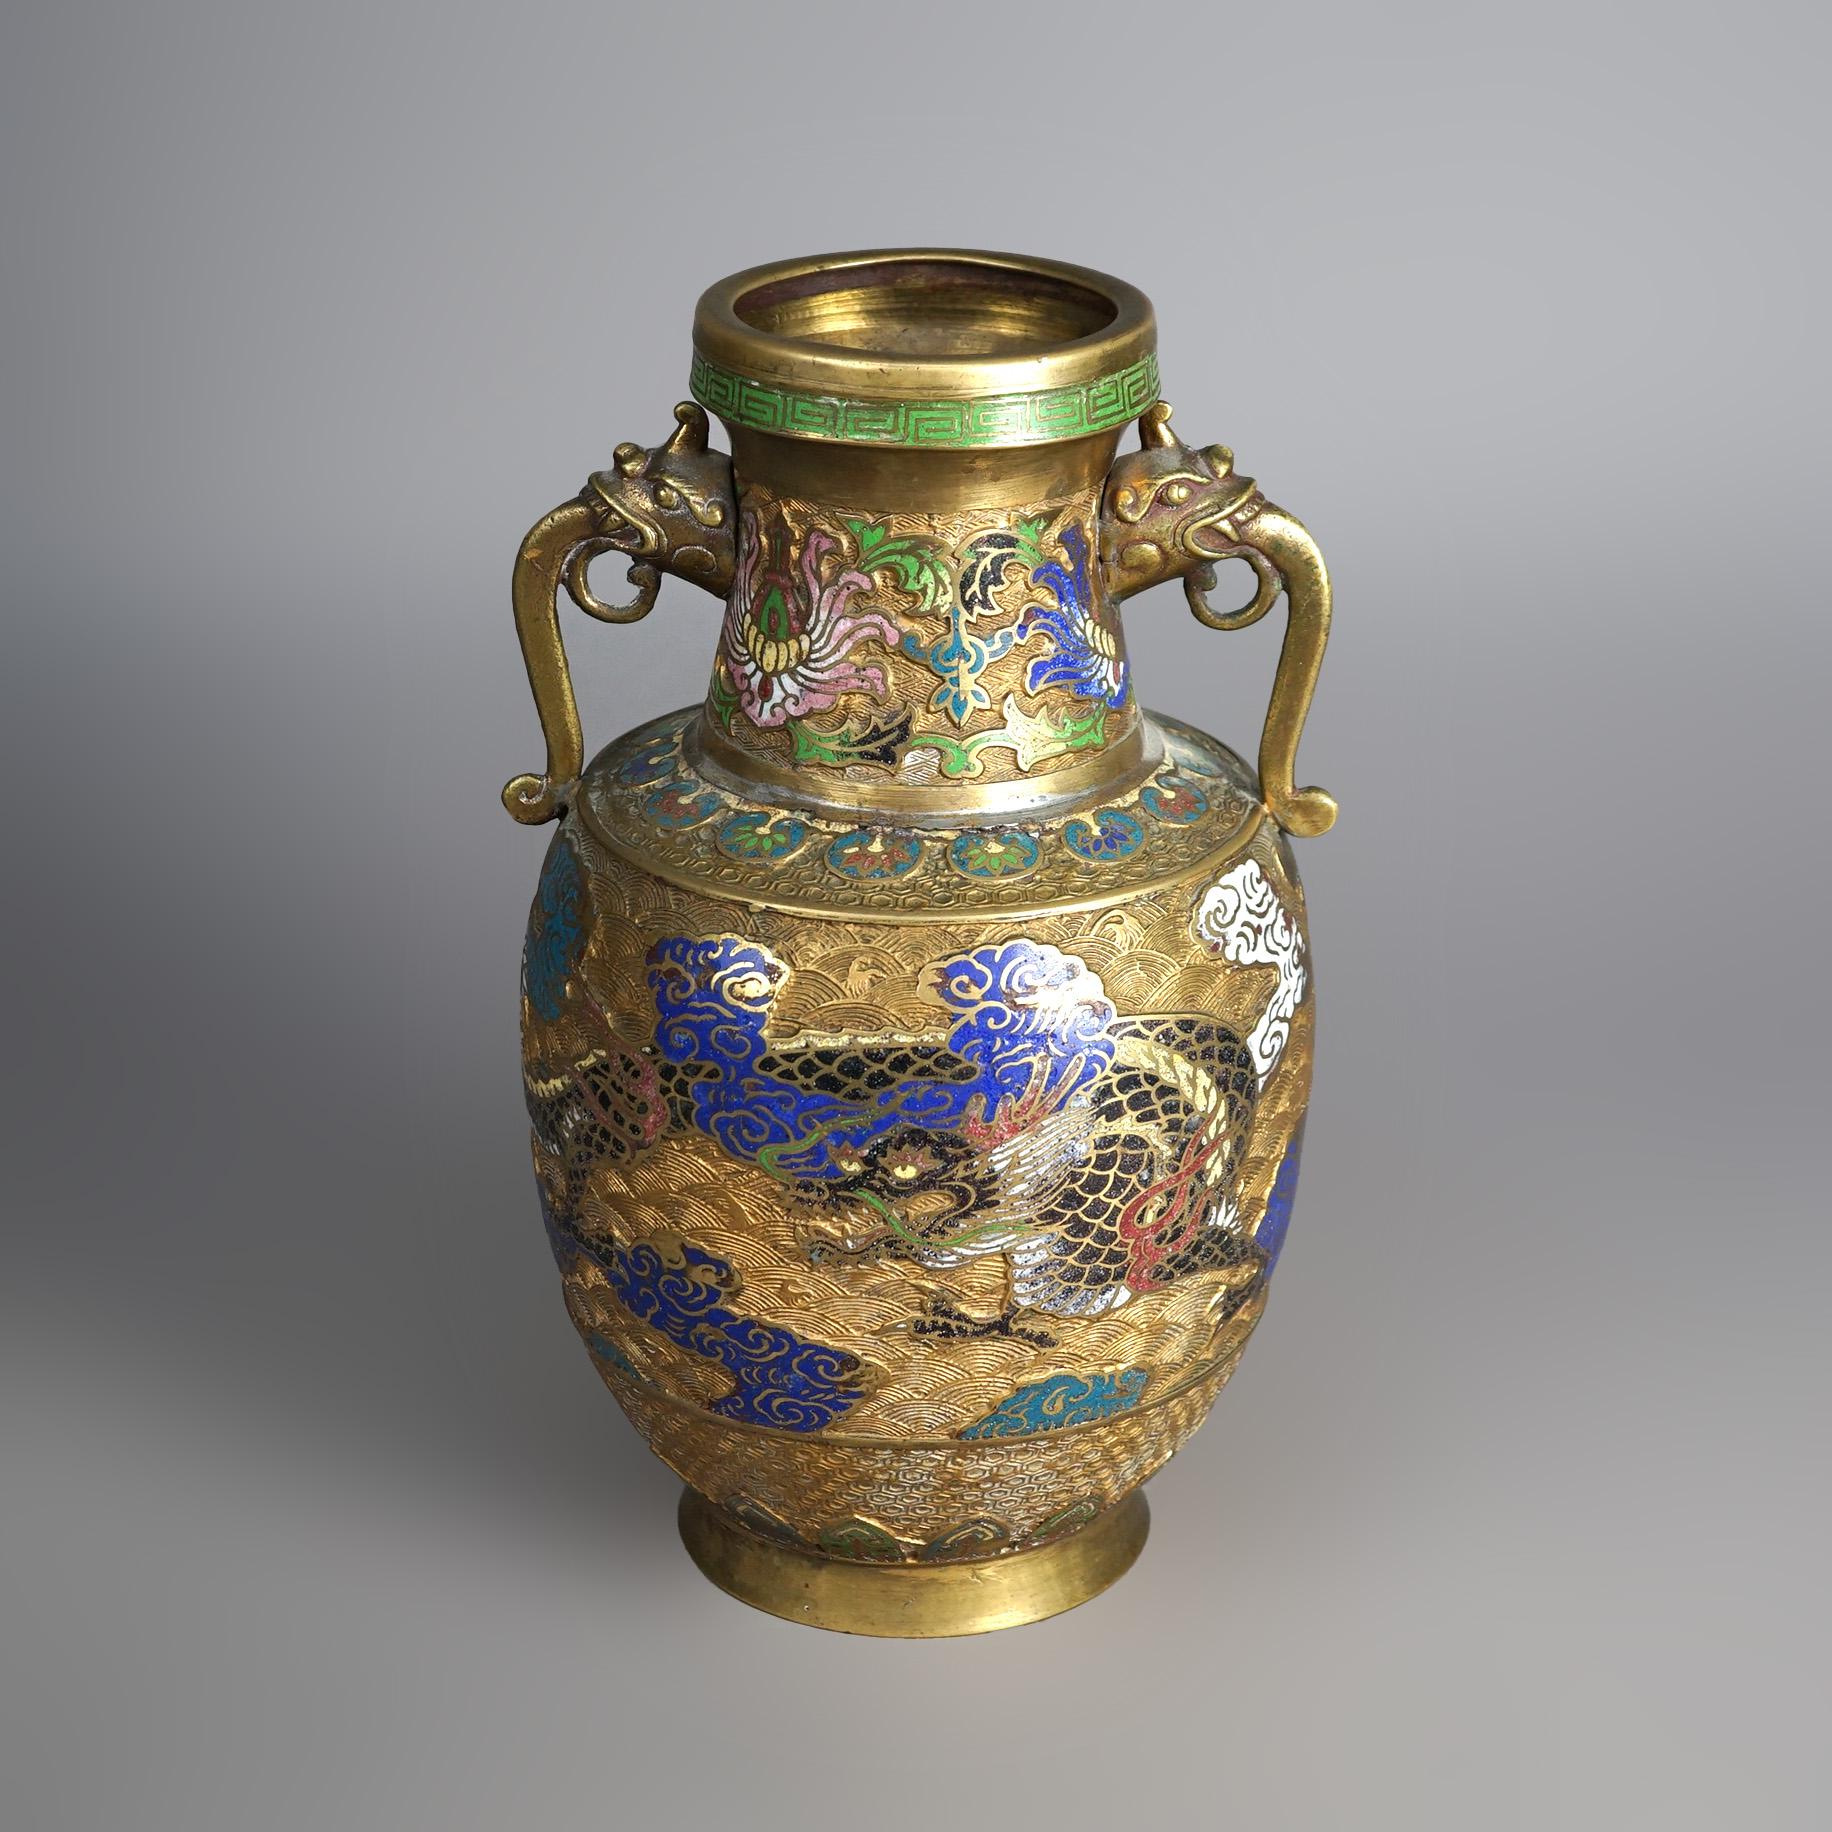 An antique Japanese figural vase offers gilt bronze construction with double figural handles and cloisonne enameled decoration including dragon, clouds and foliate elements; stamped on base as photographed; c1920

Measures- 14.25''H x 8.25''W x